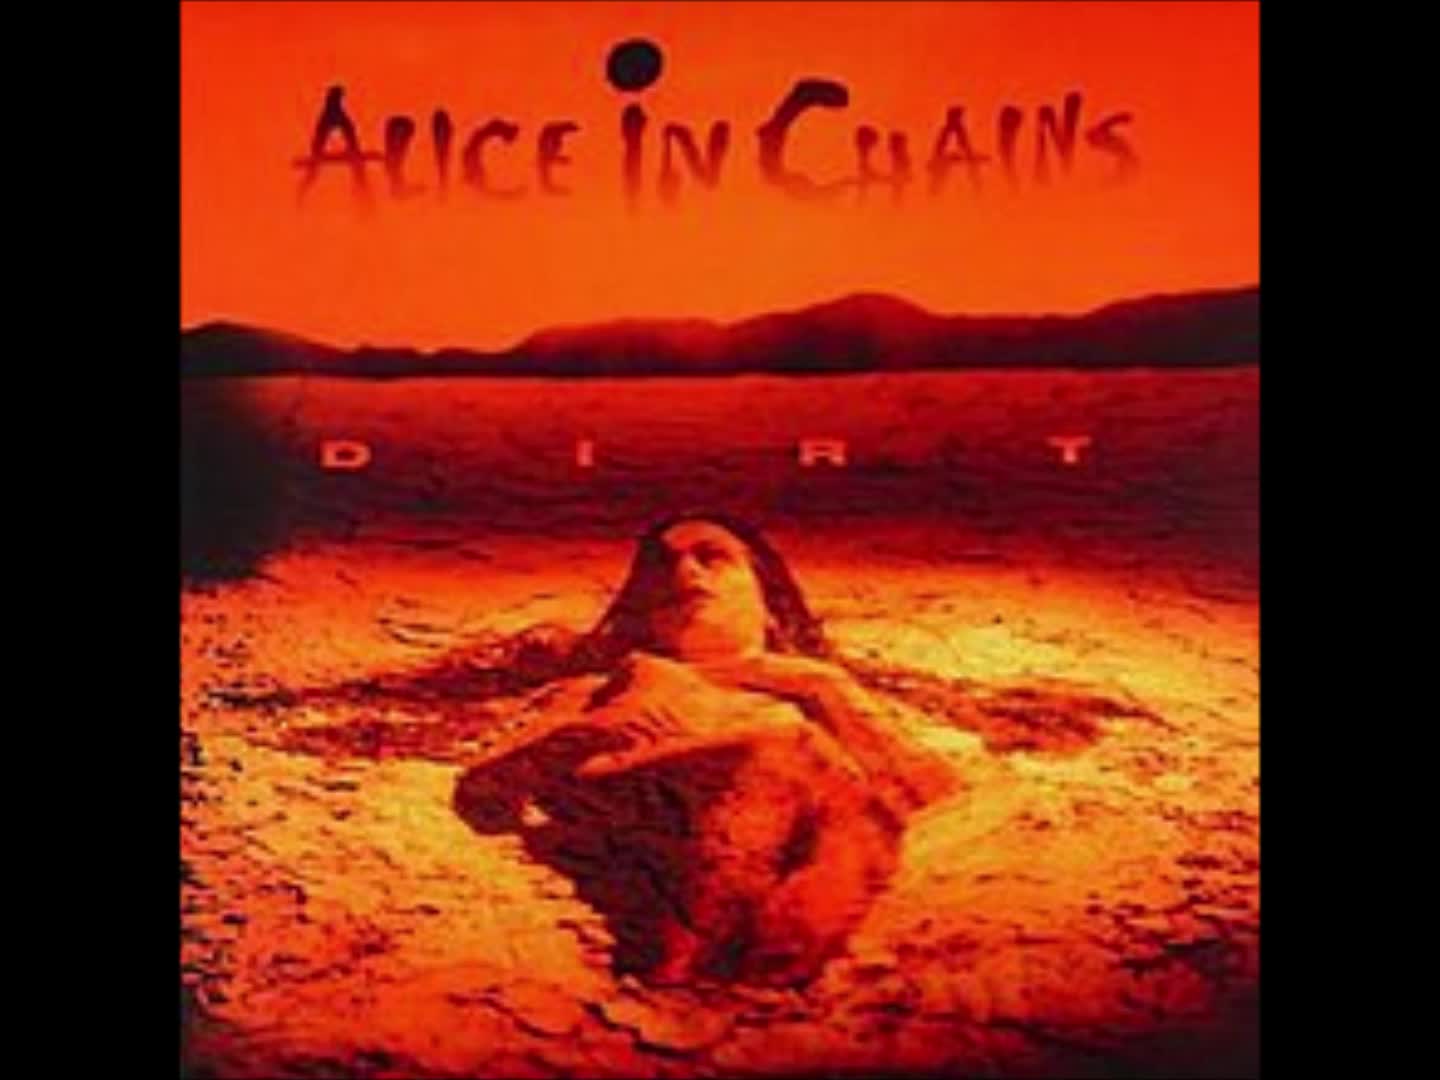 Alice in Chains - Junkhead